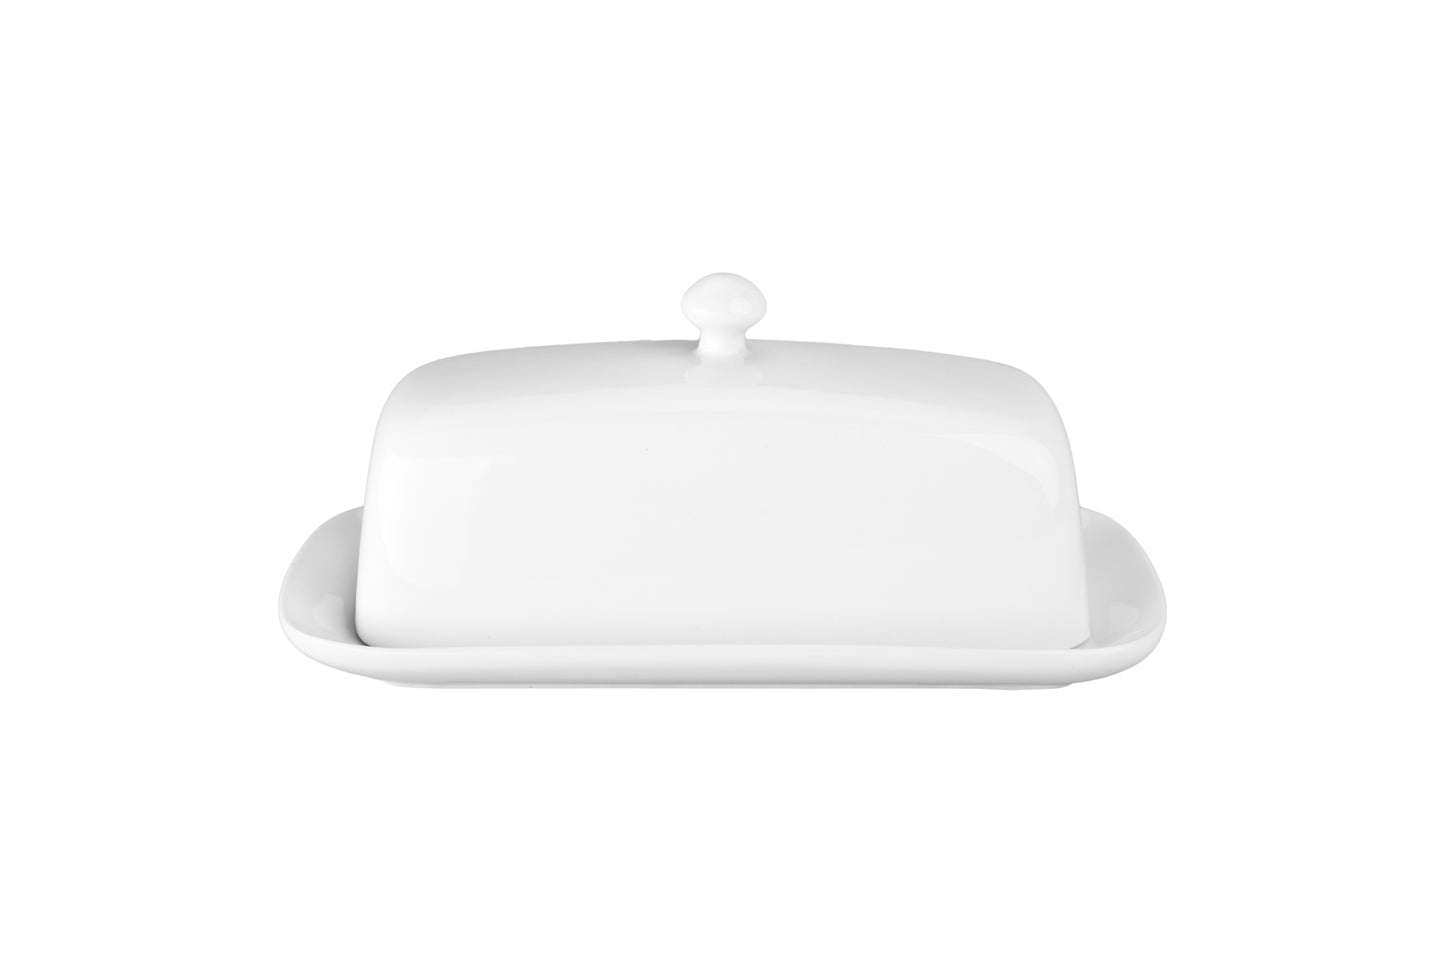 Butter Dish with Knob